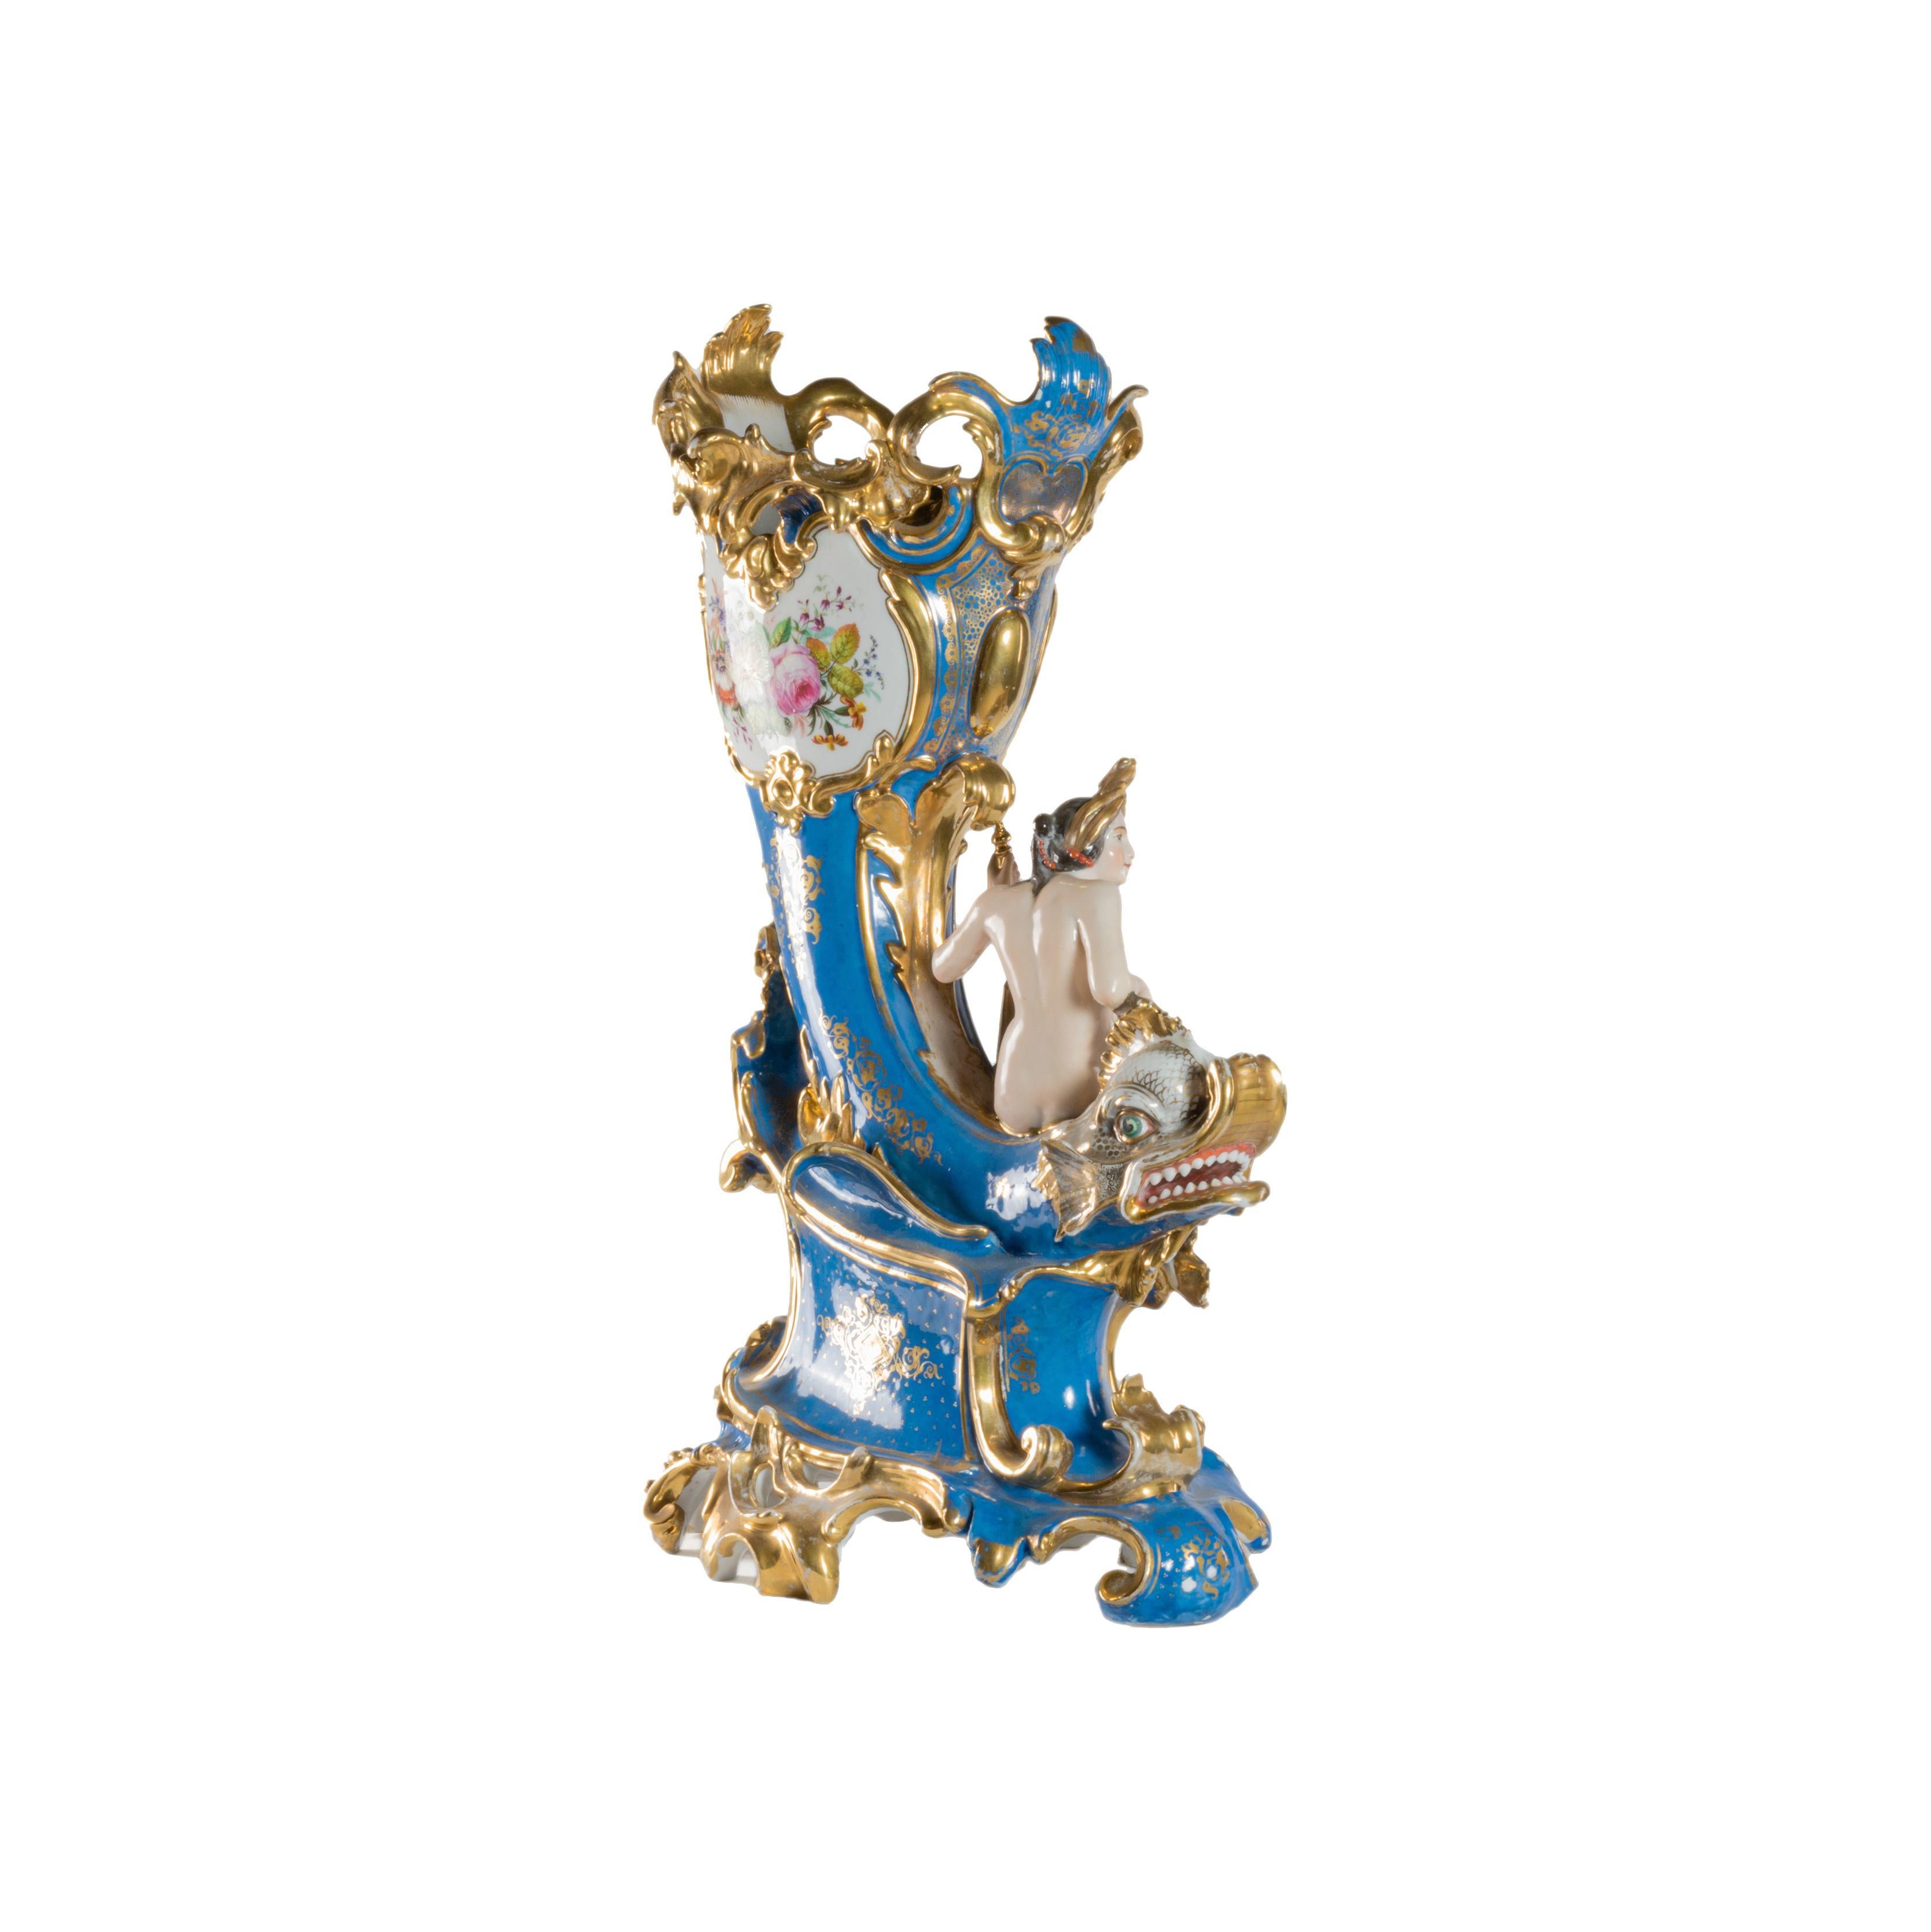 A striking vase adorned with a multicolored design depicting a dragon and a mermaid, symbolizing the mythical creature's transformation from carp to dragon. The background features a beautiful blue and gold hue, while the flowers add a touch of